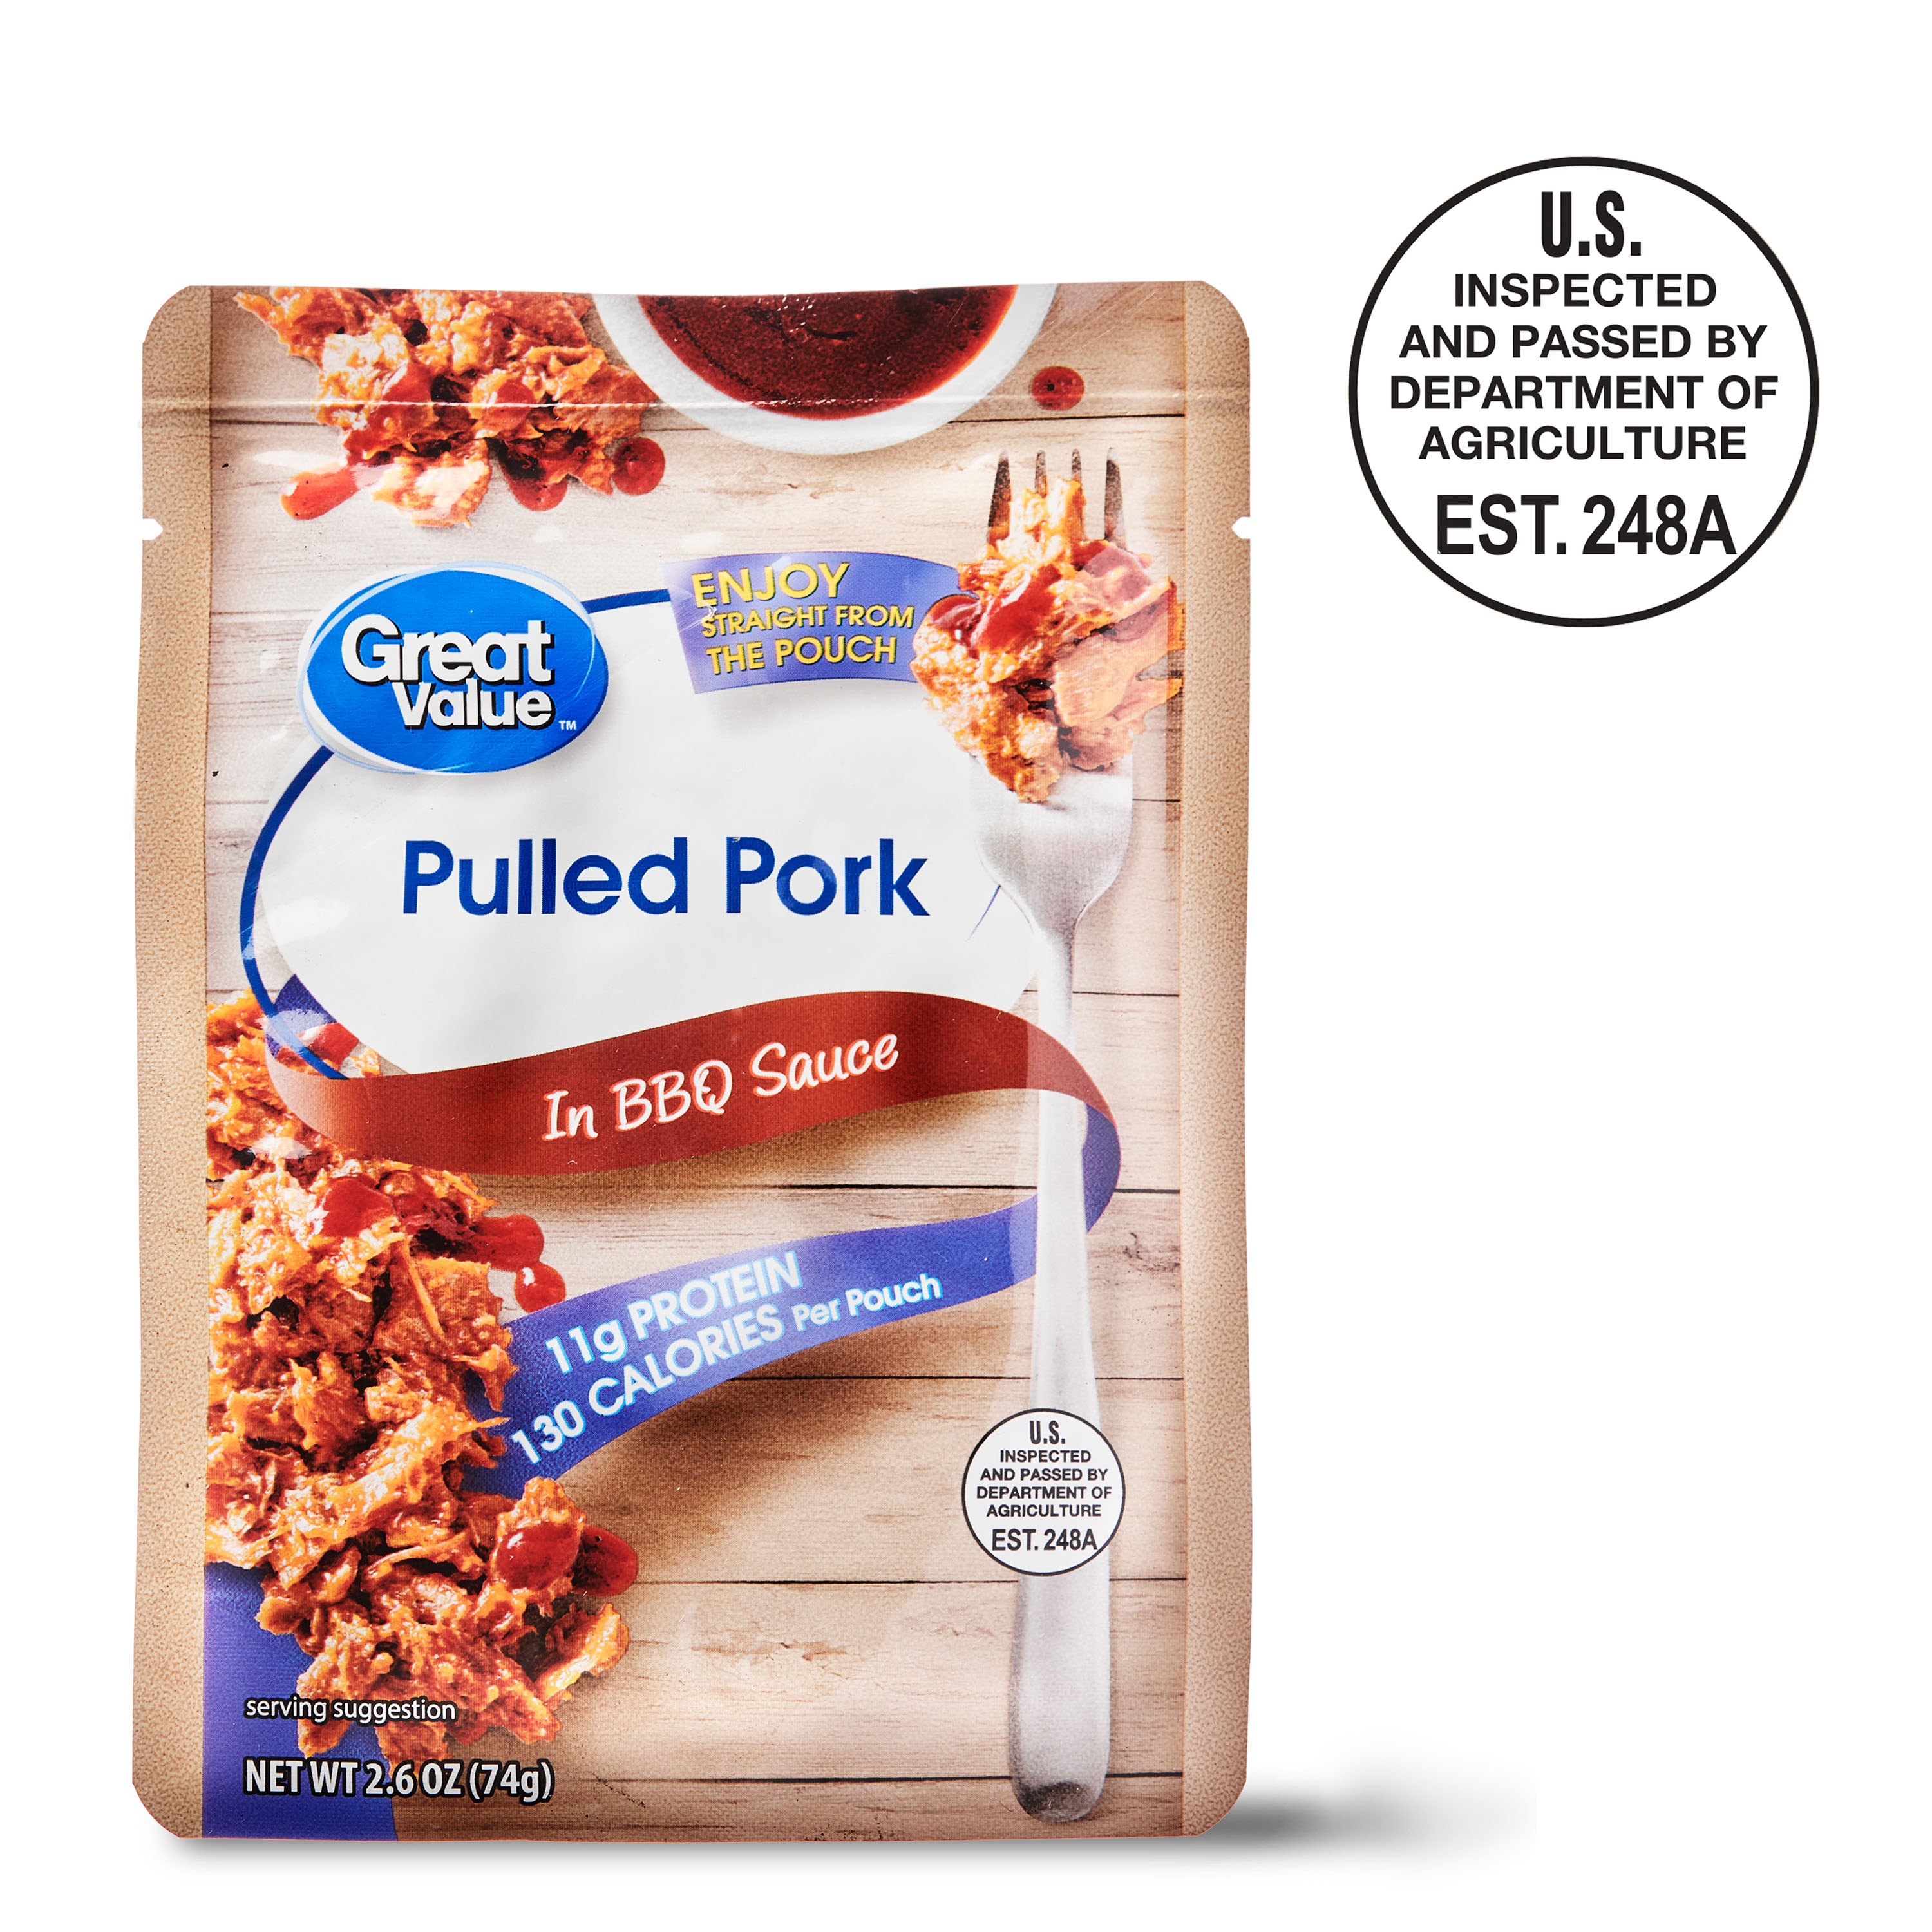 great-value-pulled-pork-in-bbq-sauce-pouch-2-6-oz-2.jpg